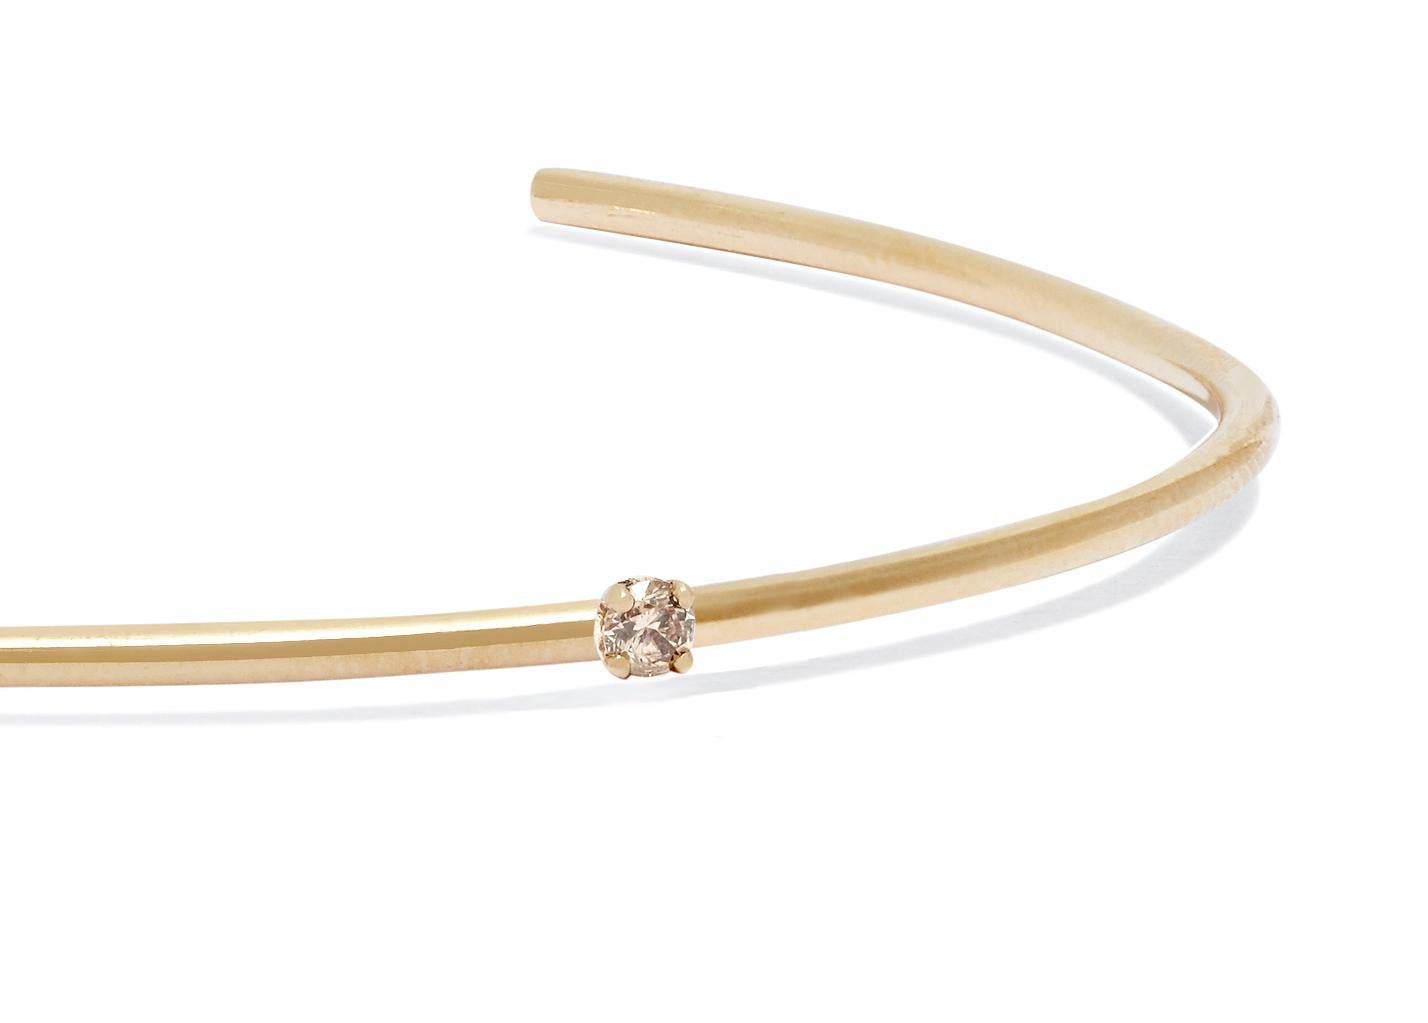 Clean-lined and elegant, this solid 18-carat yellow gold cuff features a champagne diamond set to sparkle at the wrist bone.  Diamond measures approximately 2 mm; 0.025 total carat weight. 

Handmade in London. Hallmarked 750 Allison Bryan London. 